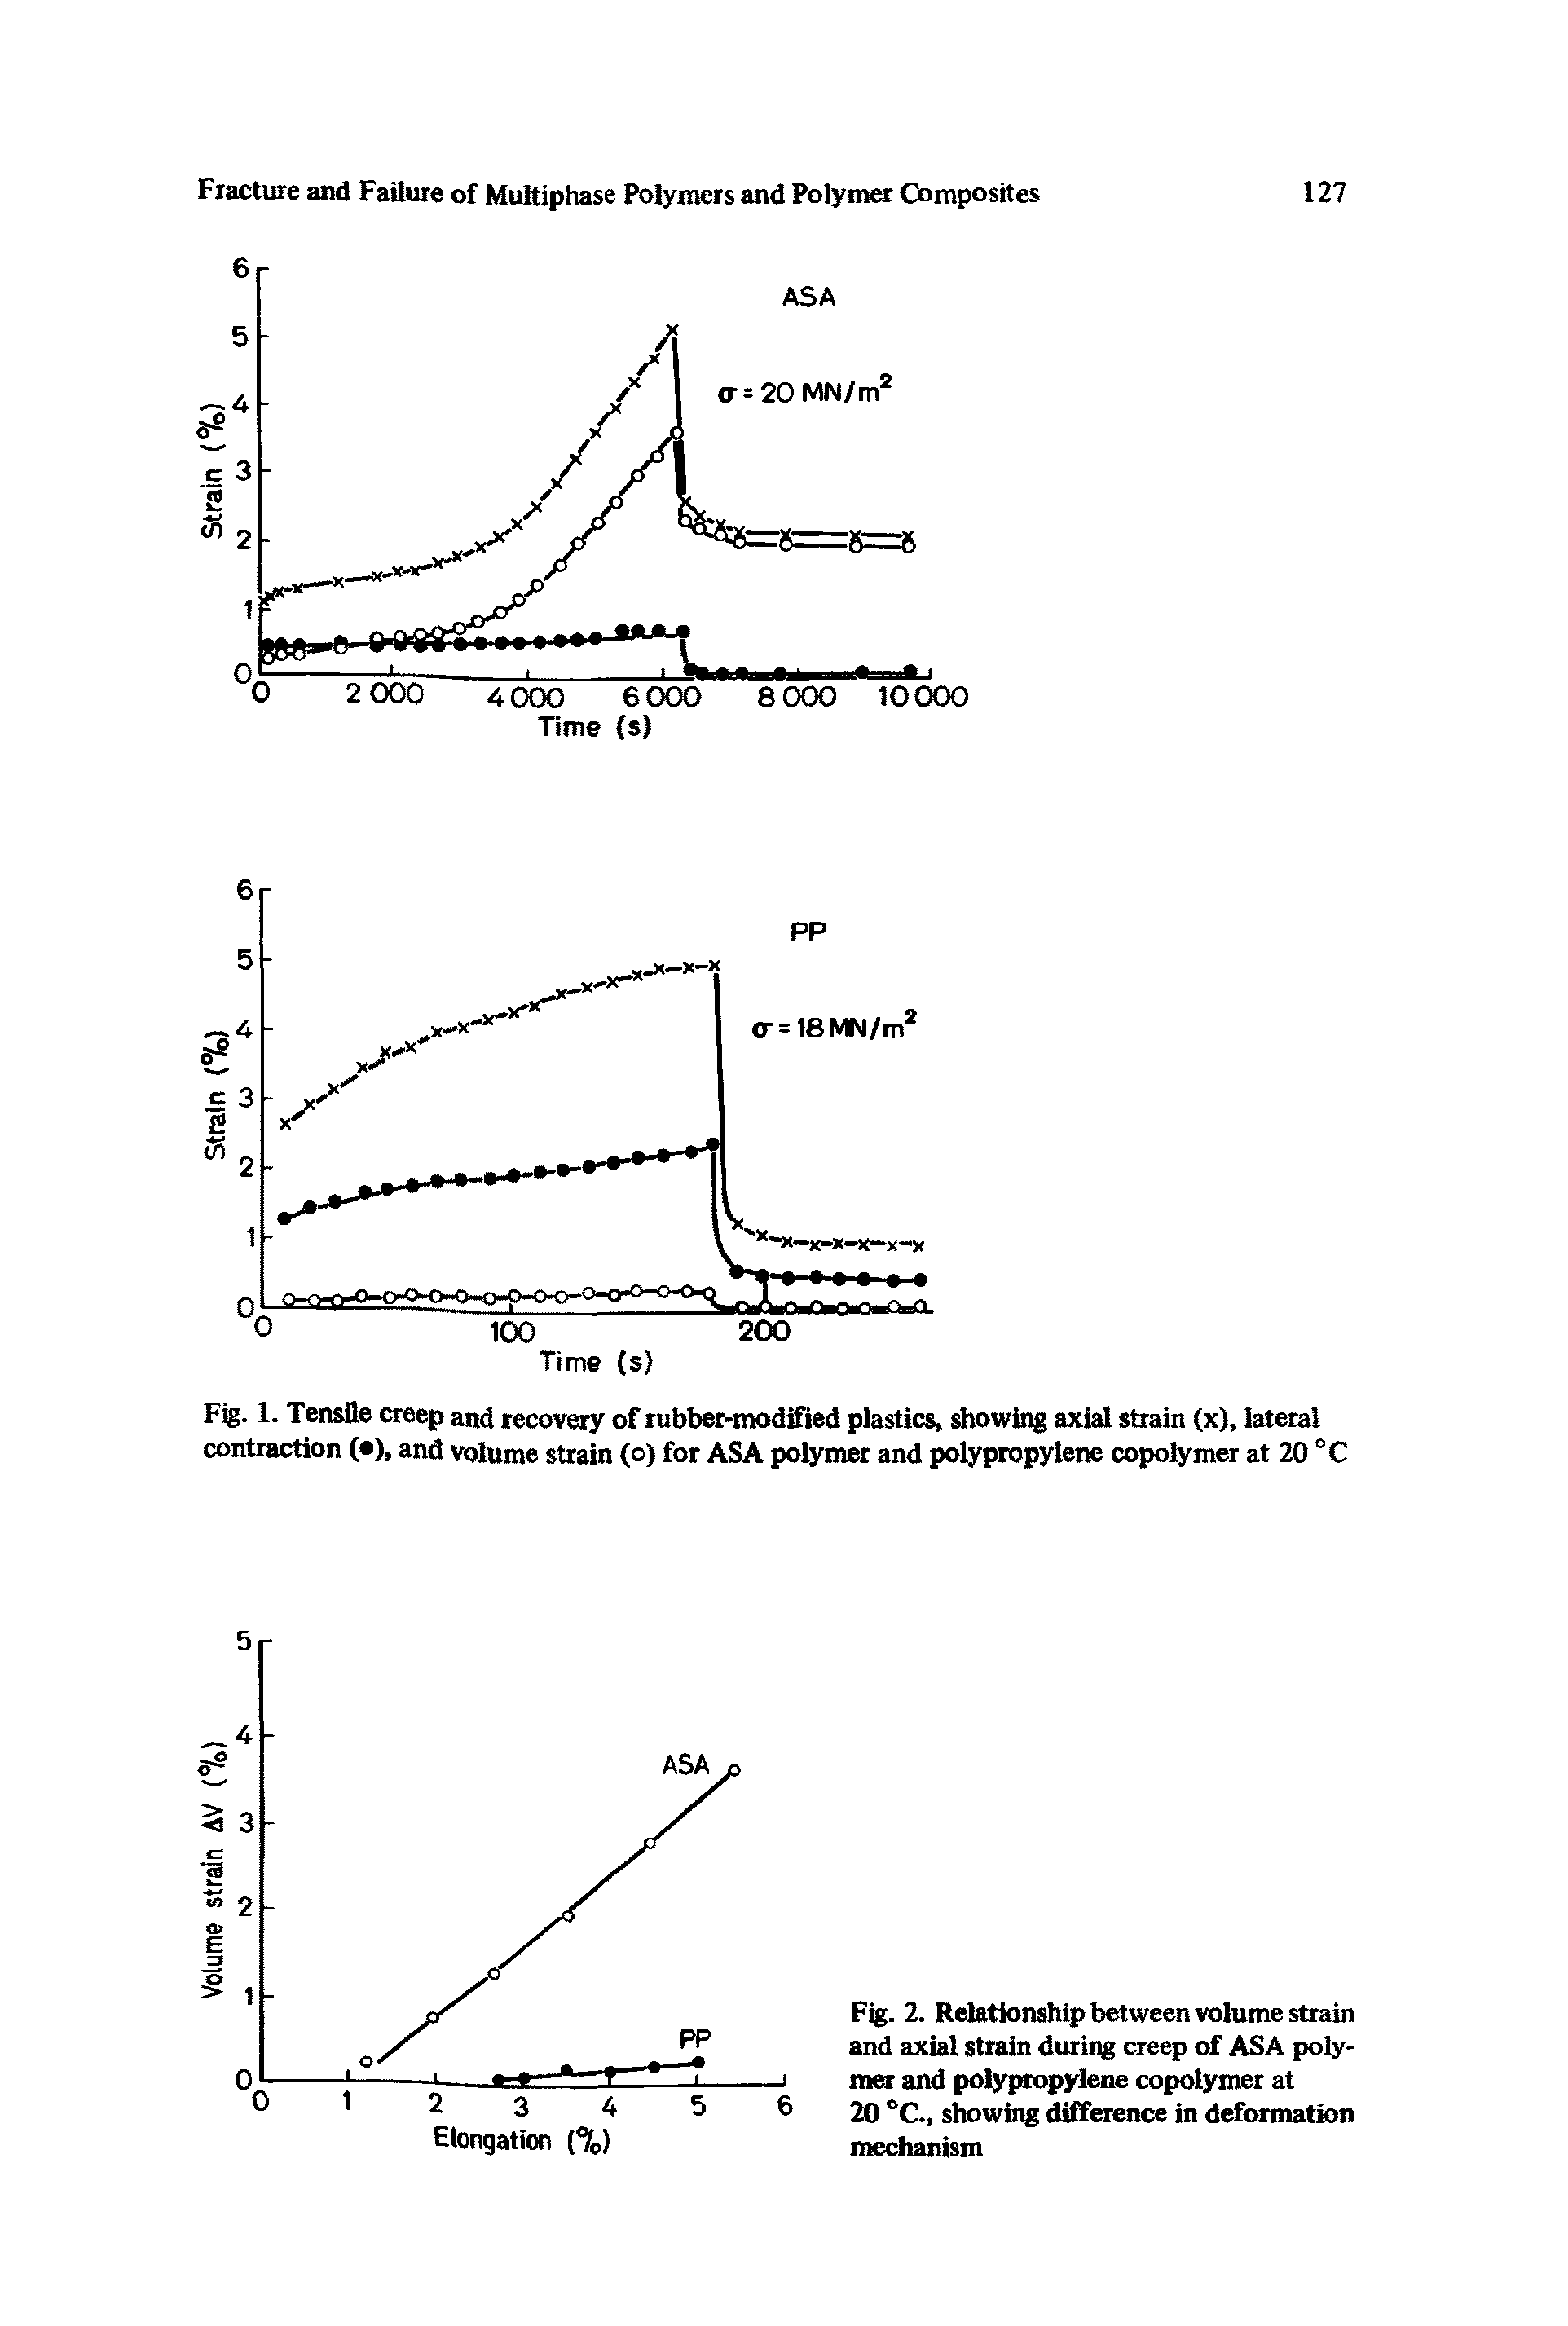 Fig. 2. Relationship between volume strain and axial strain during creep of ASA polymer and polypropylene copolymer at 20 °C., showing difference in deformation mechanism...